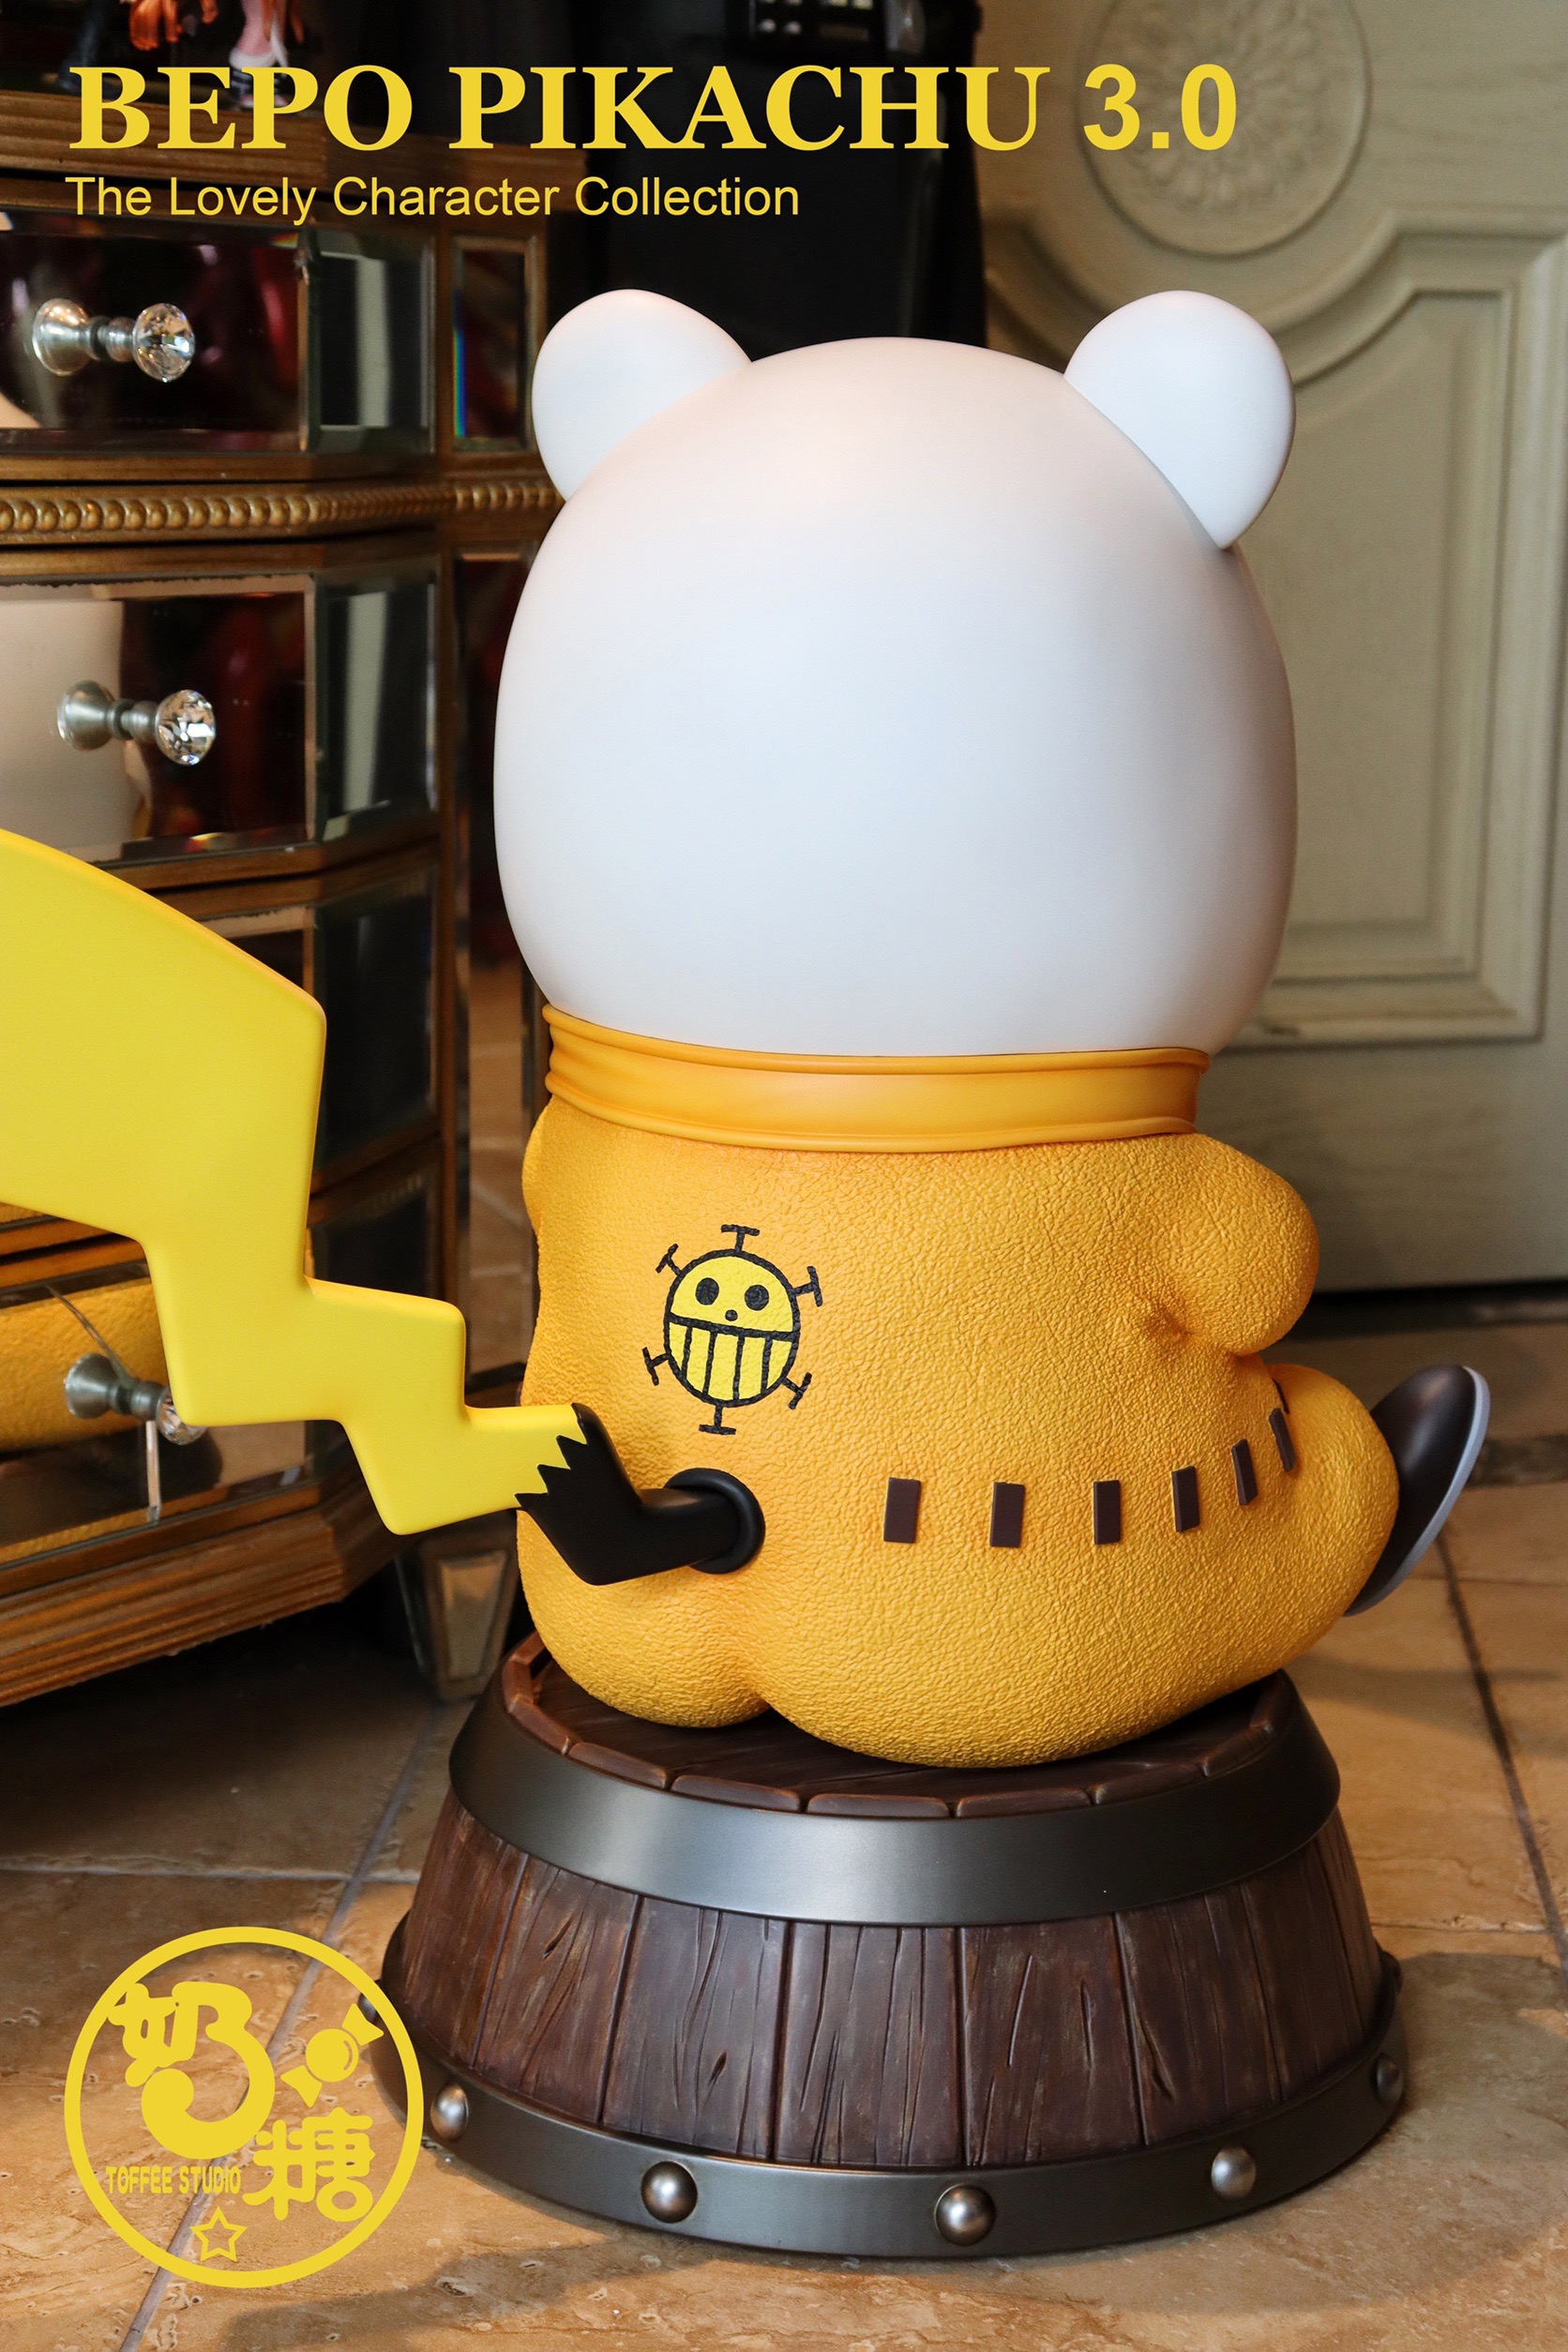 Pikachu x Bepo 3.0 by Toffee Studio (มัดจำ) [[SOLD OUT]]